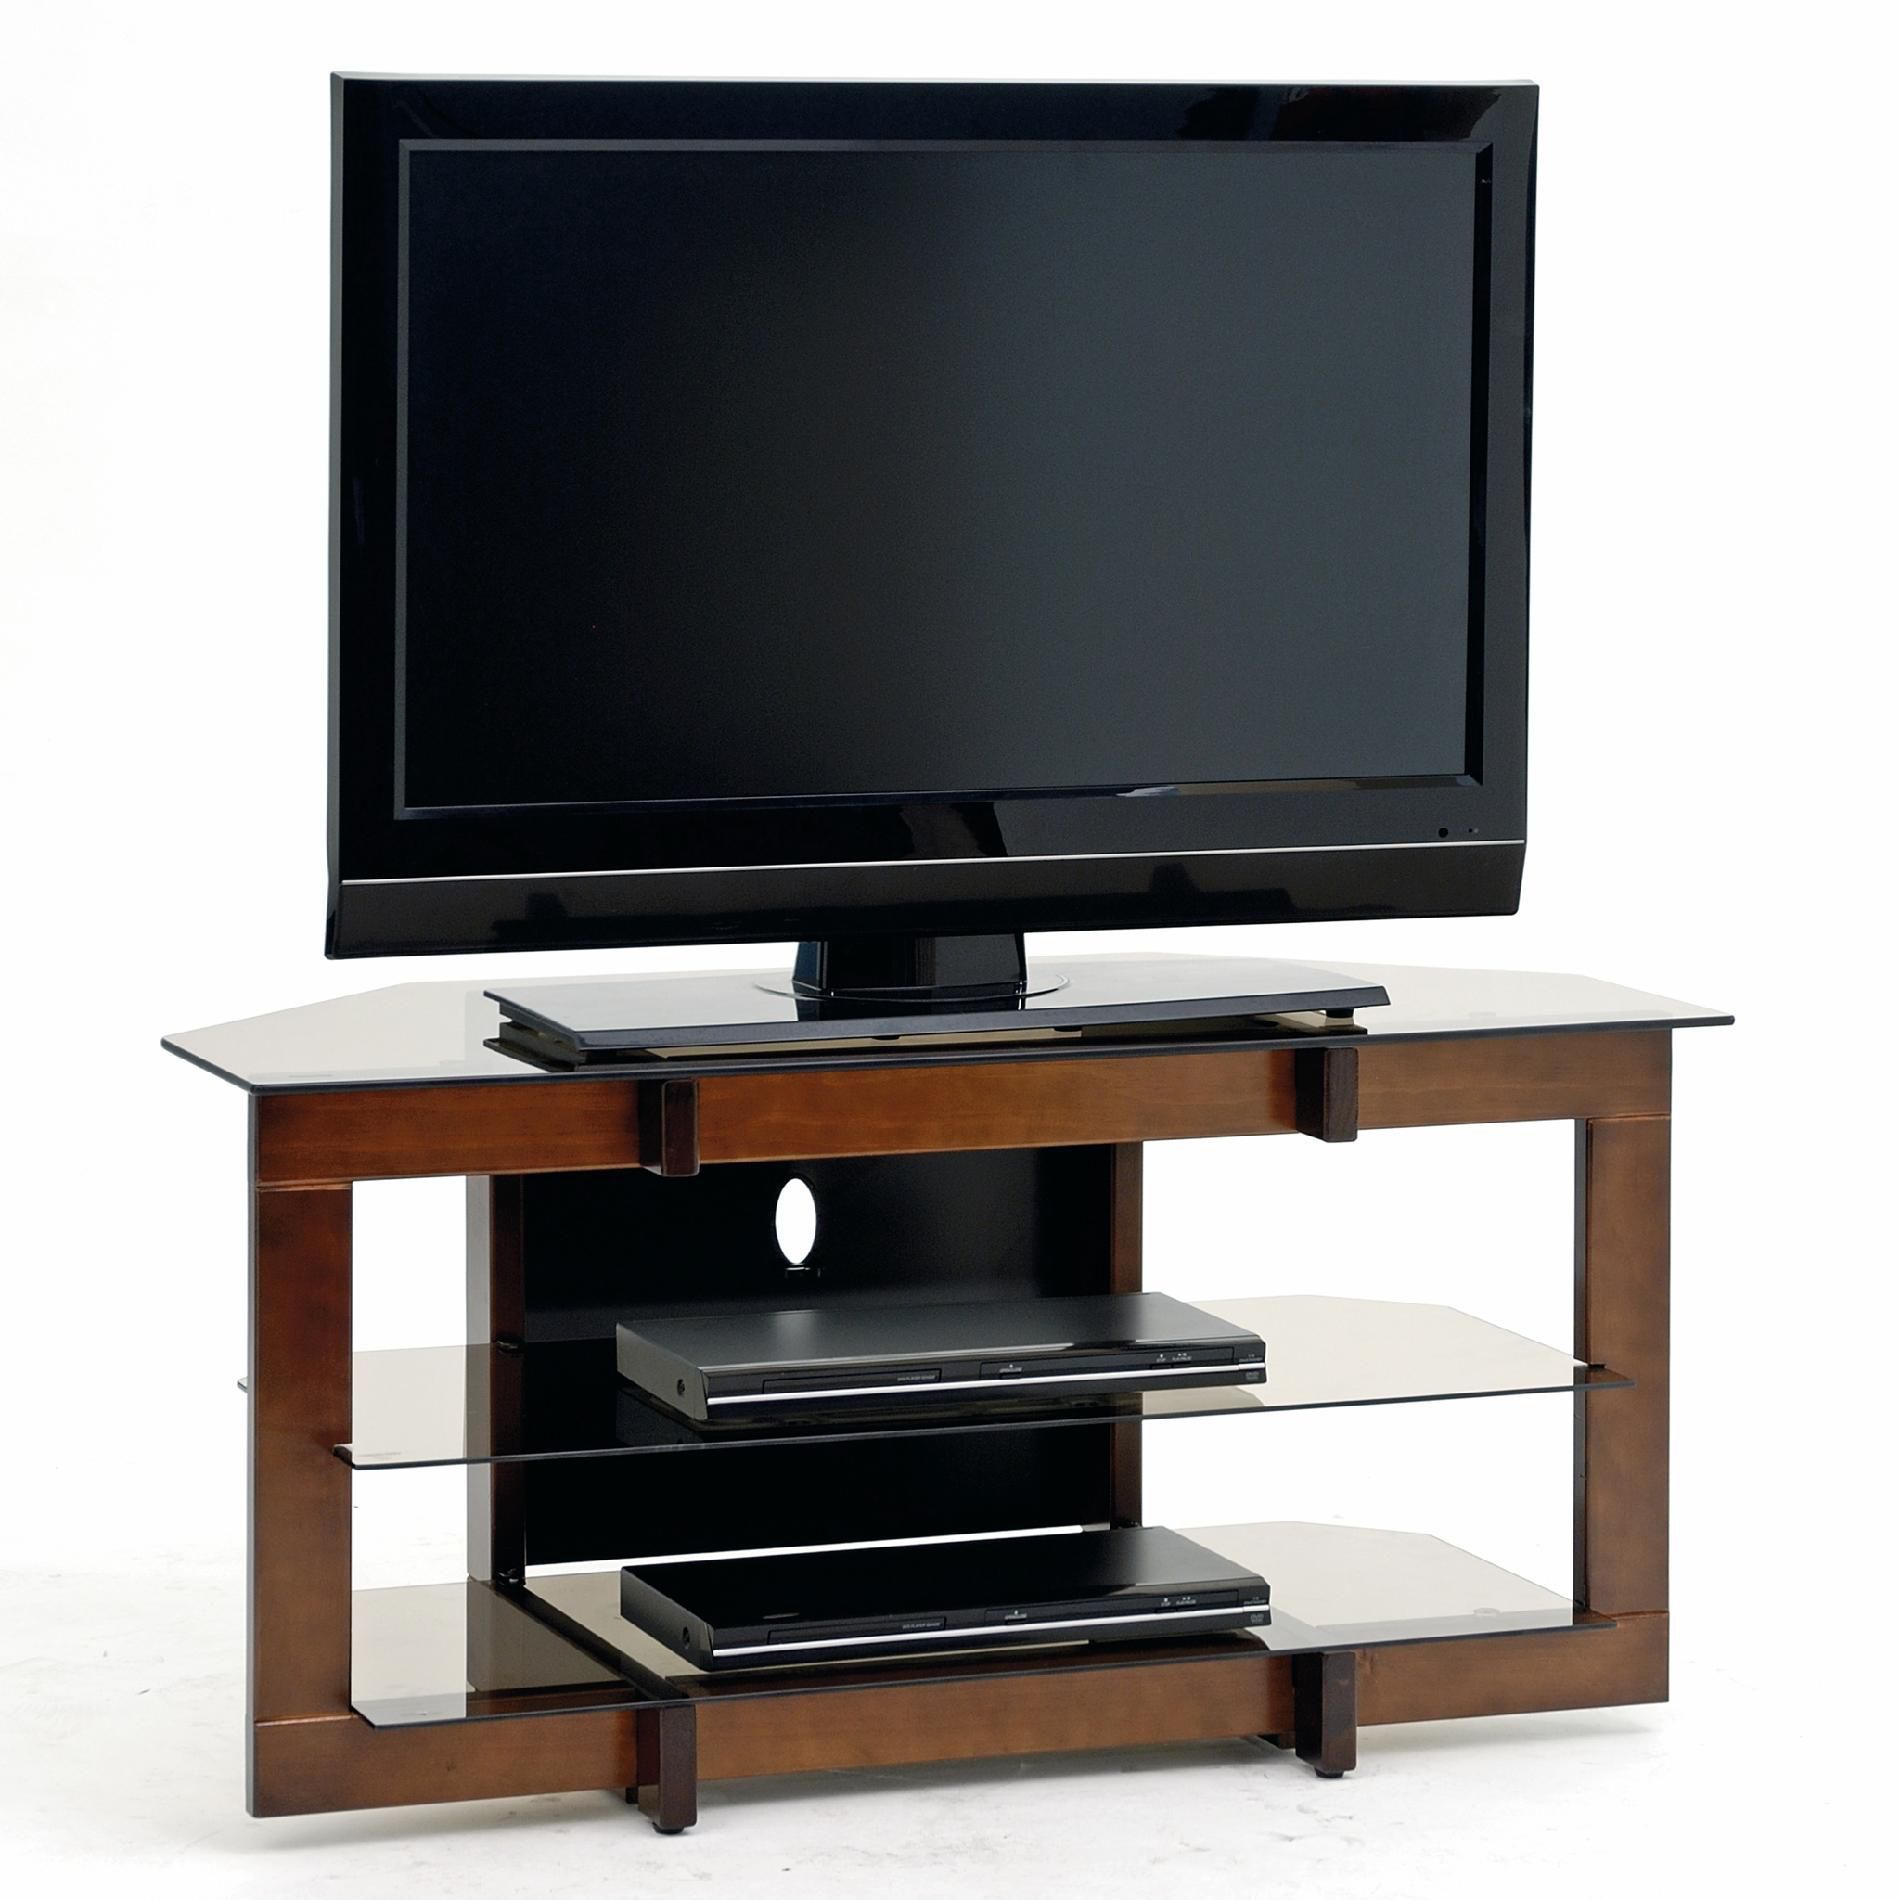 Awesome Best Oak And Glass Tv Stand In 2020 | Tv Ecke, Tv Intended For Small Corner Tv Stands (View 3 of 15)